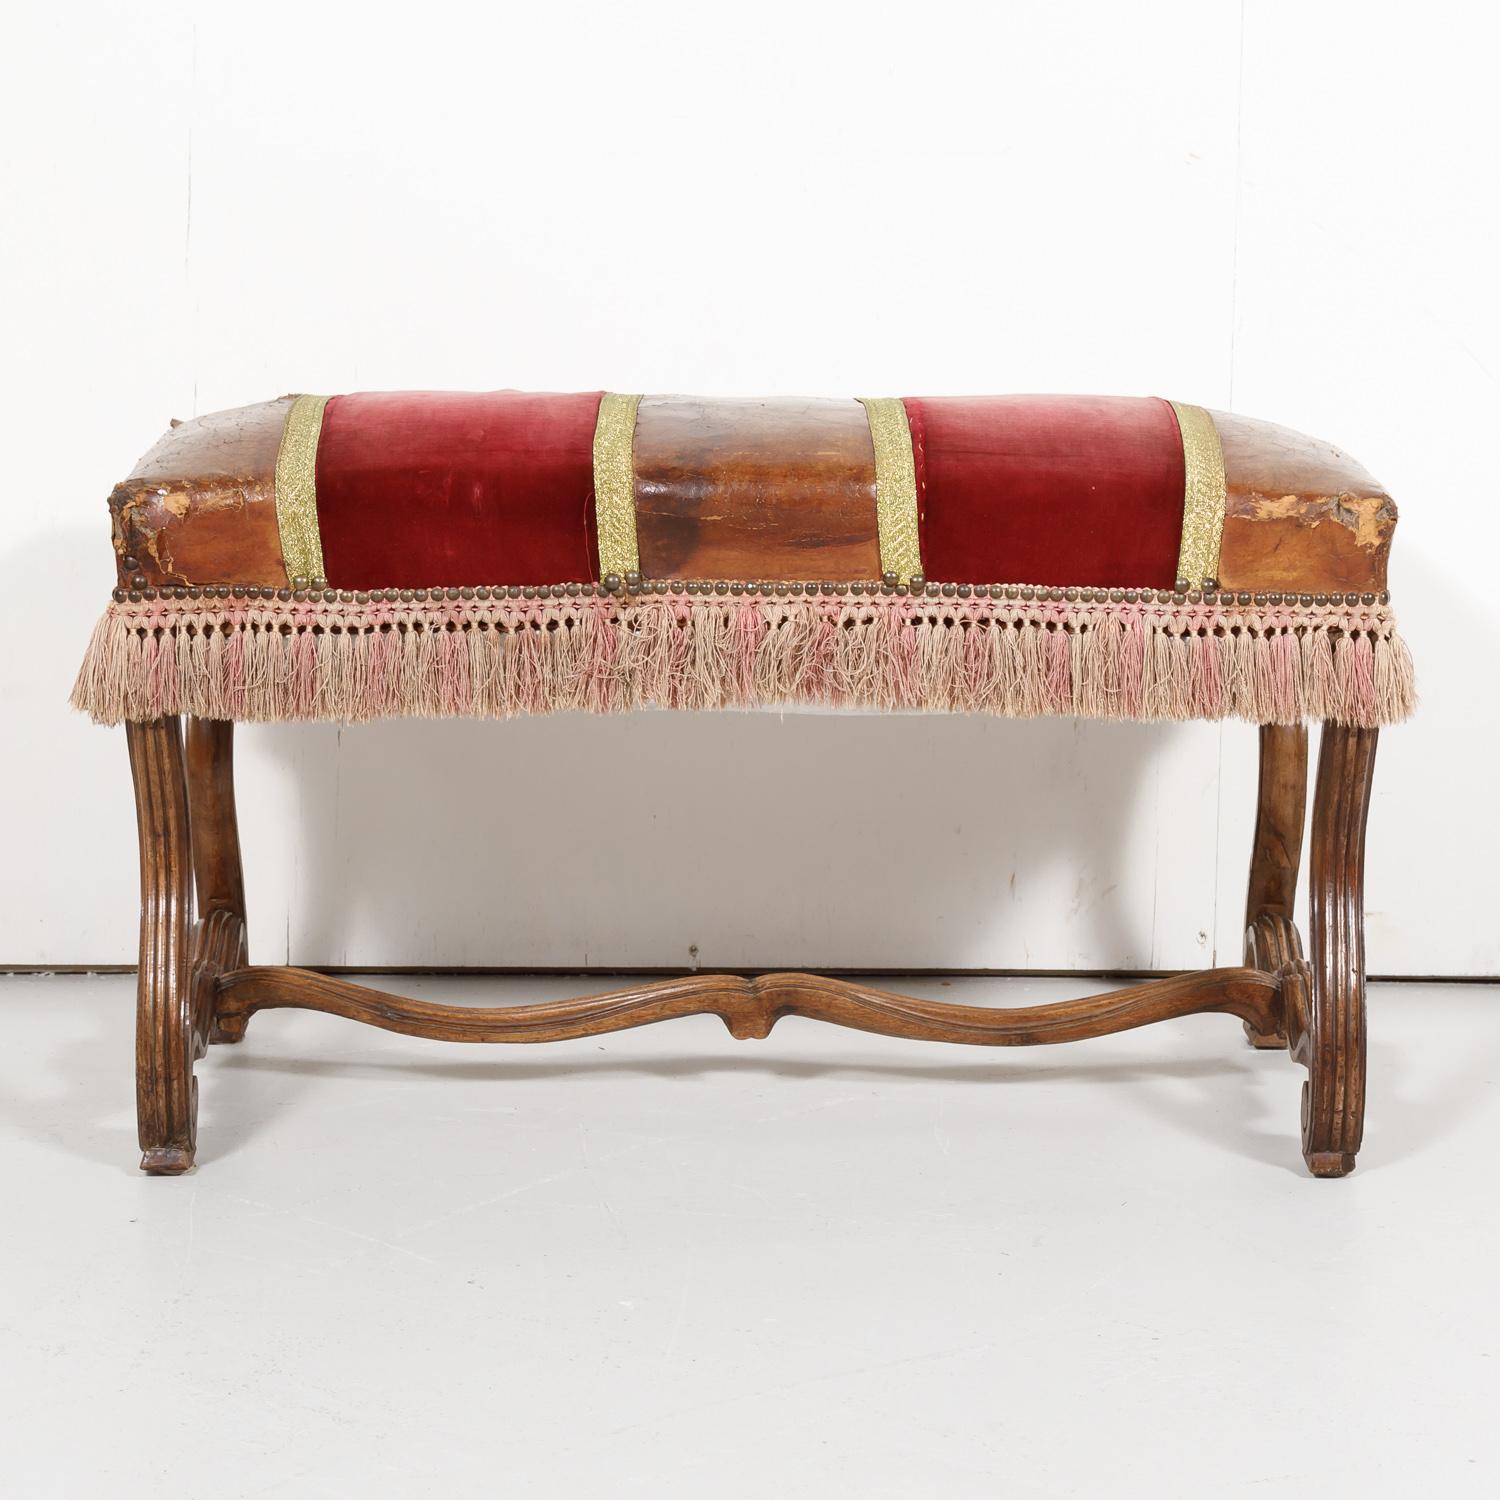 Late 19th Century 19th Century Spanish Backless Leather and Velvet Louis XIV Style Bench For Sale